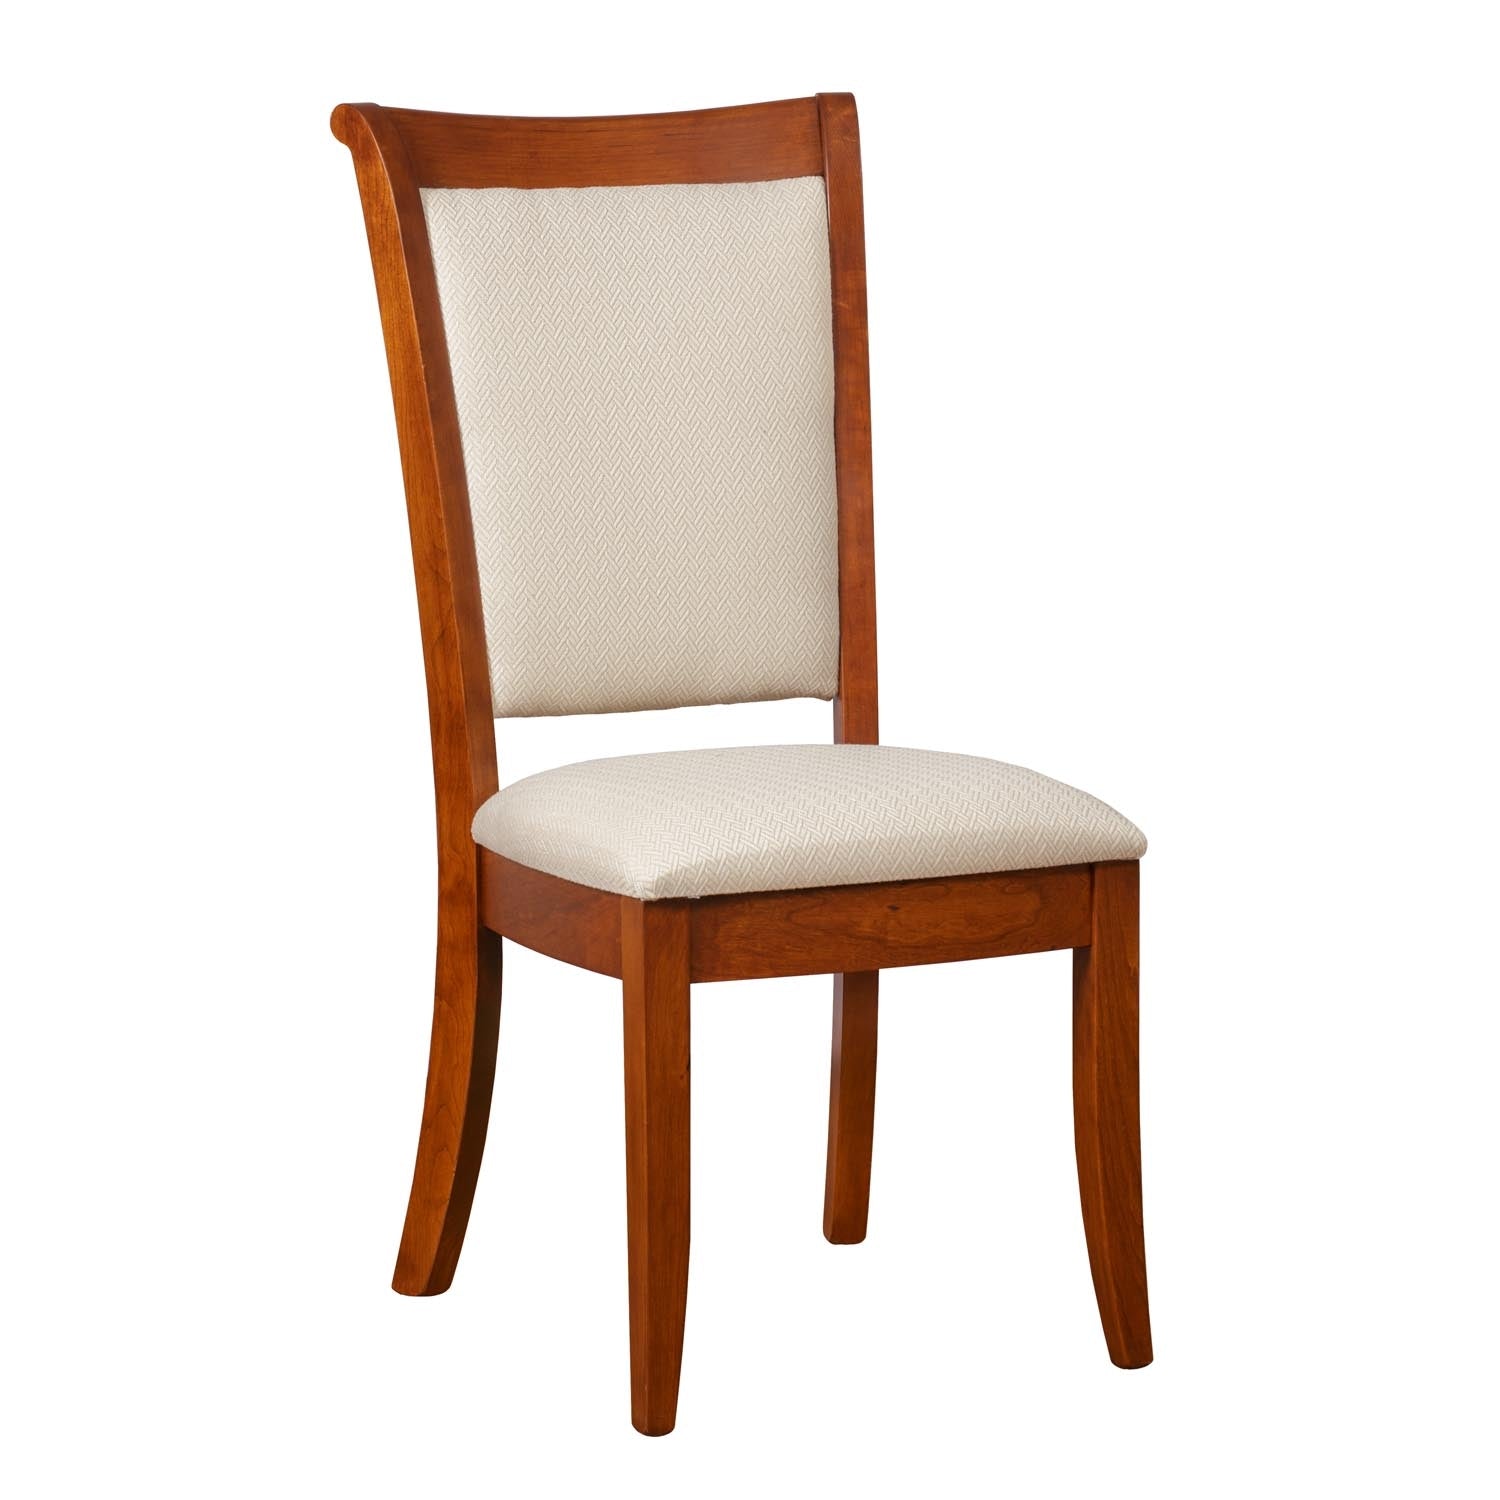 Kimberly Chair - snyders.furniture